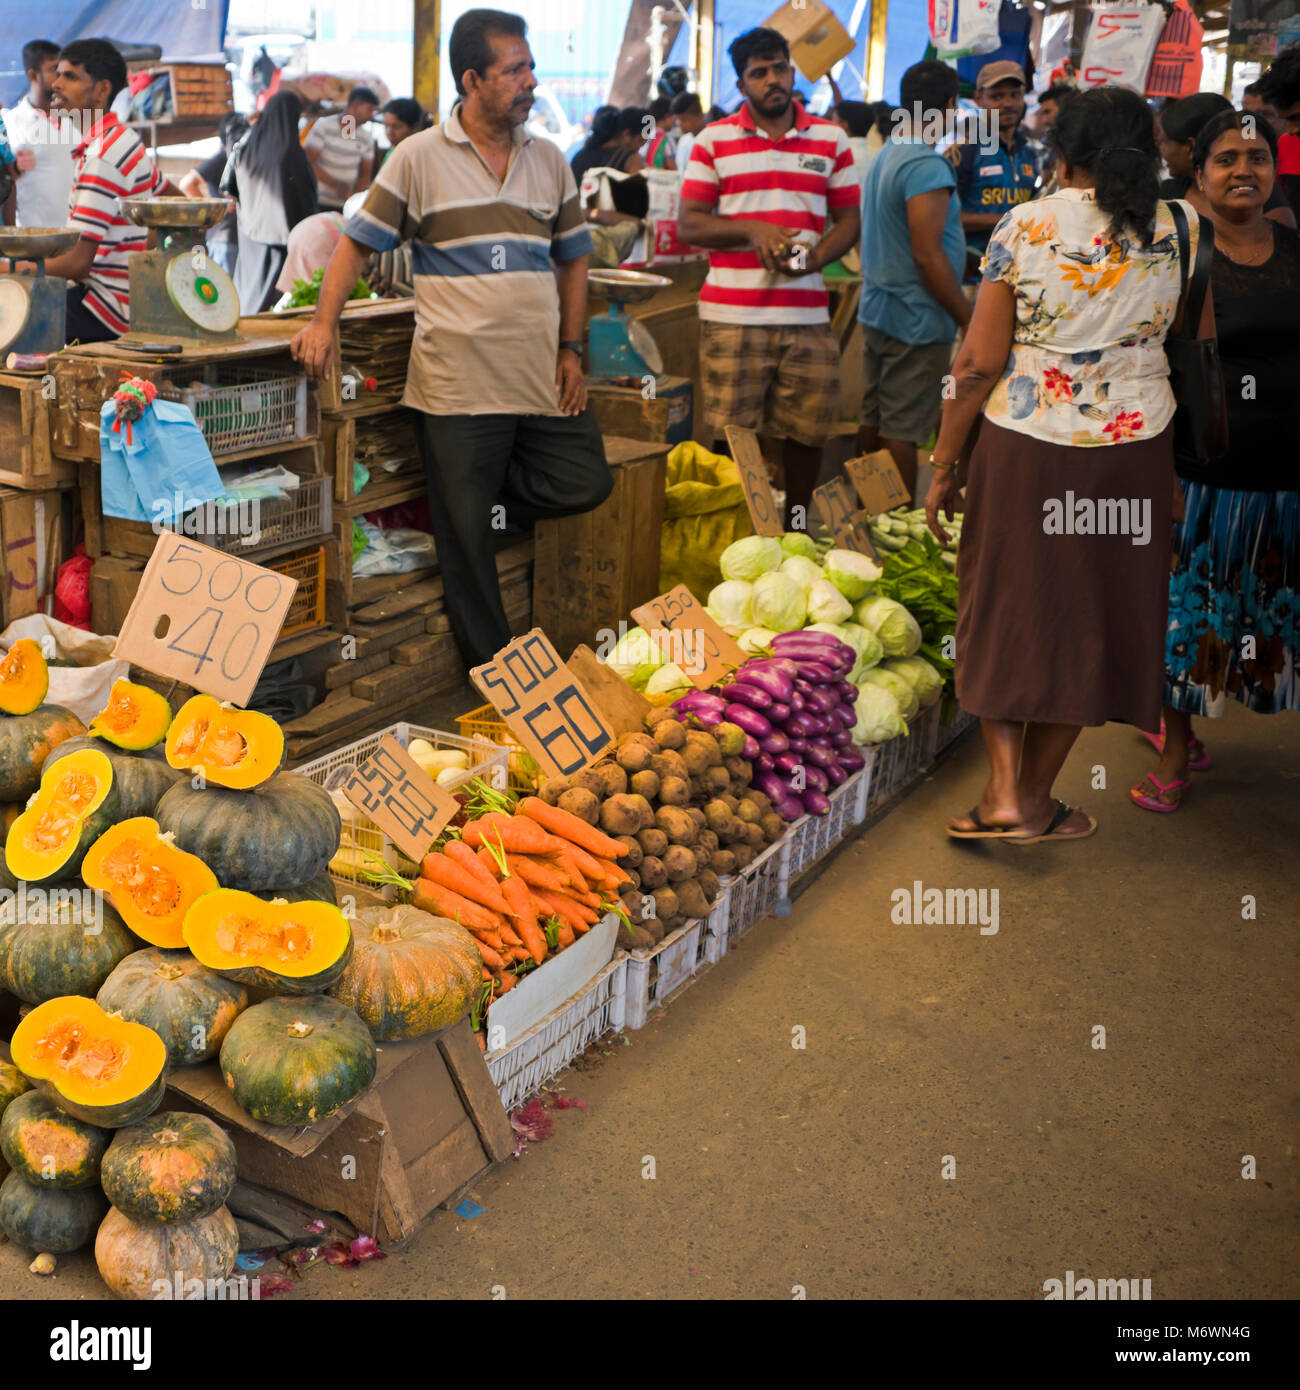 Square view of fruit and vegetable stalls at Pettah market in Colombo, Sri Lanka. Stock Photo